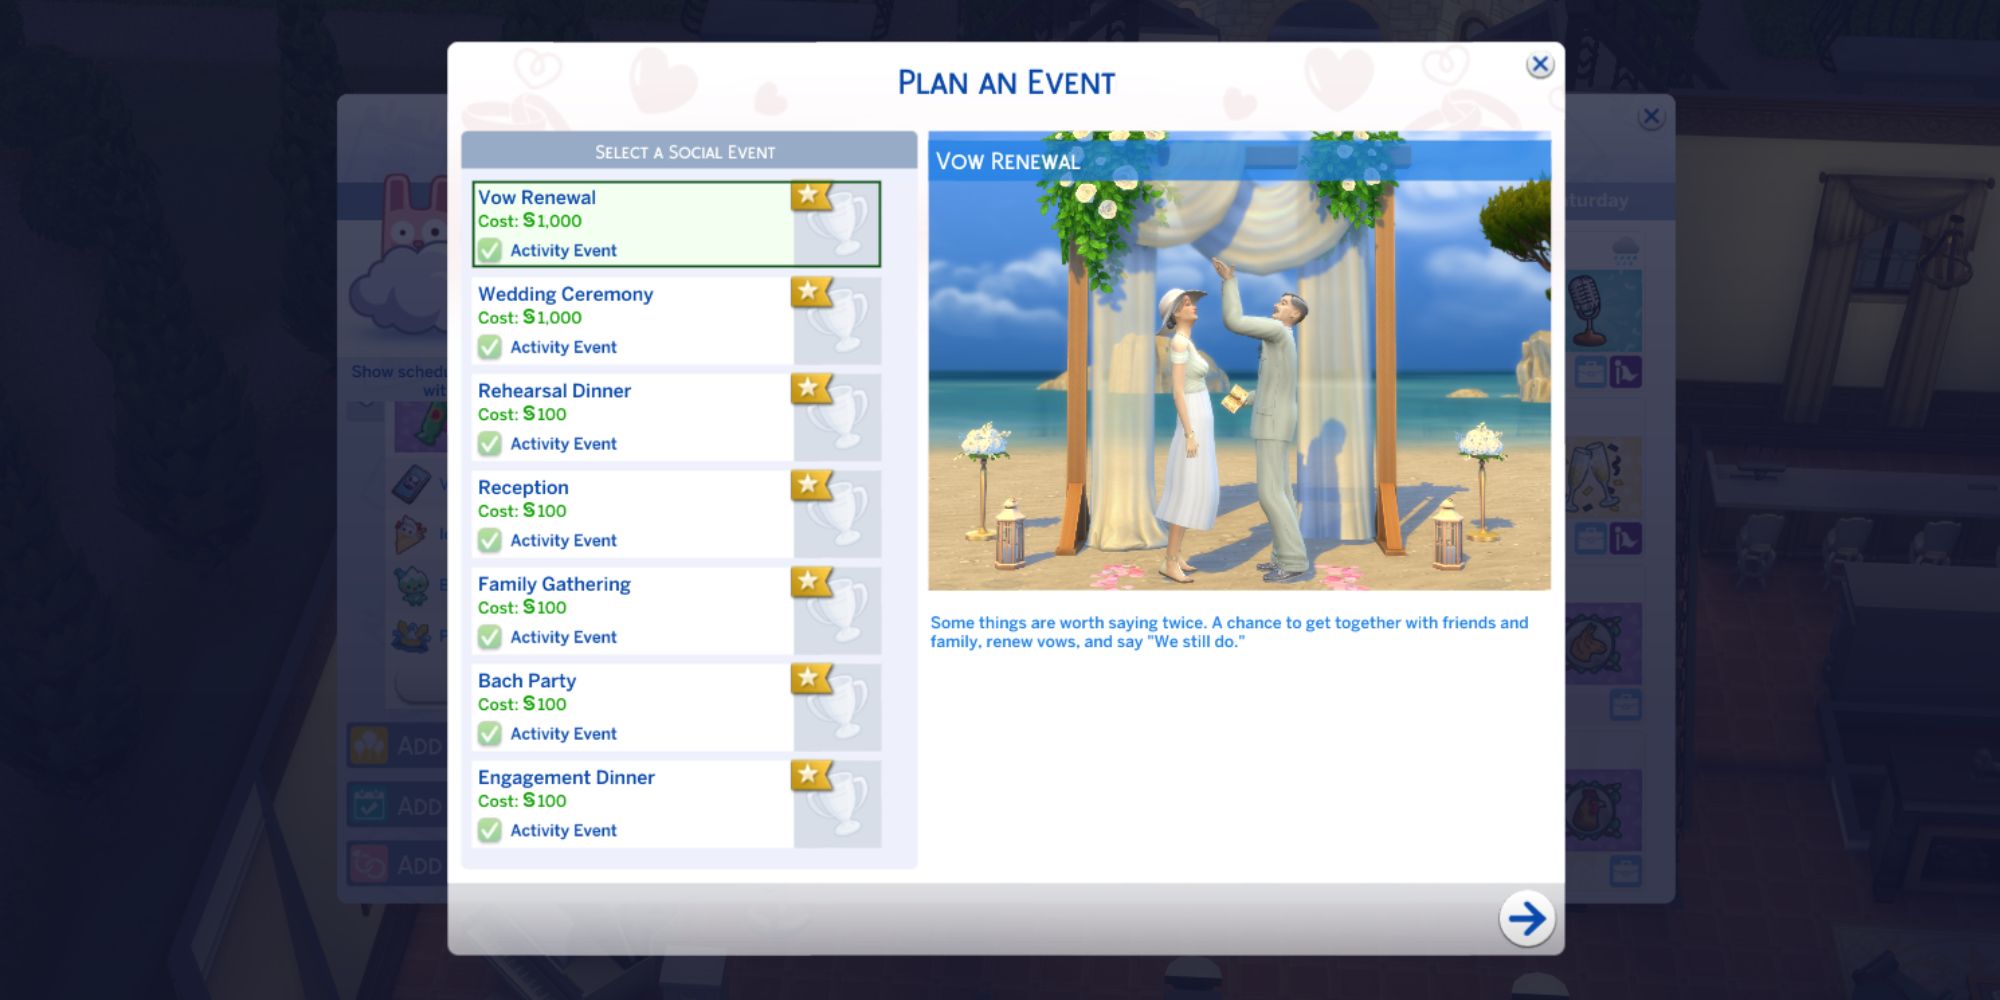 Sims 4 weddings all events